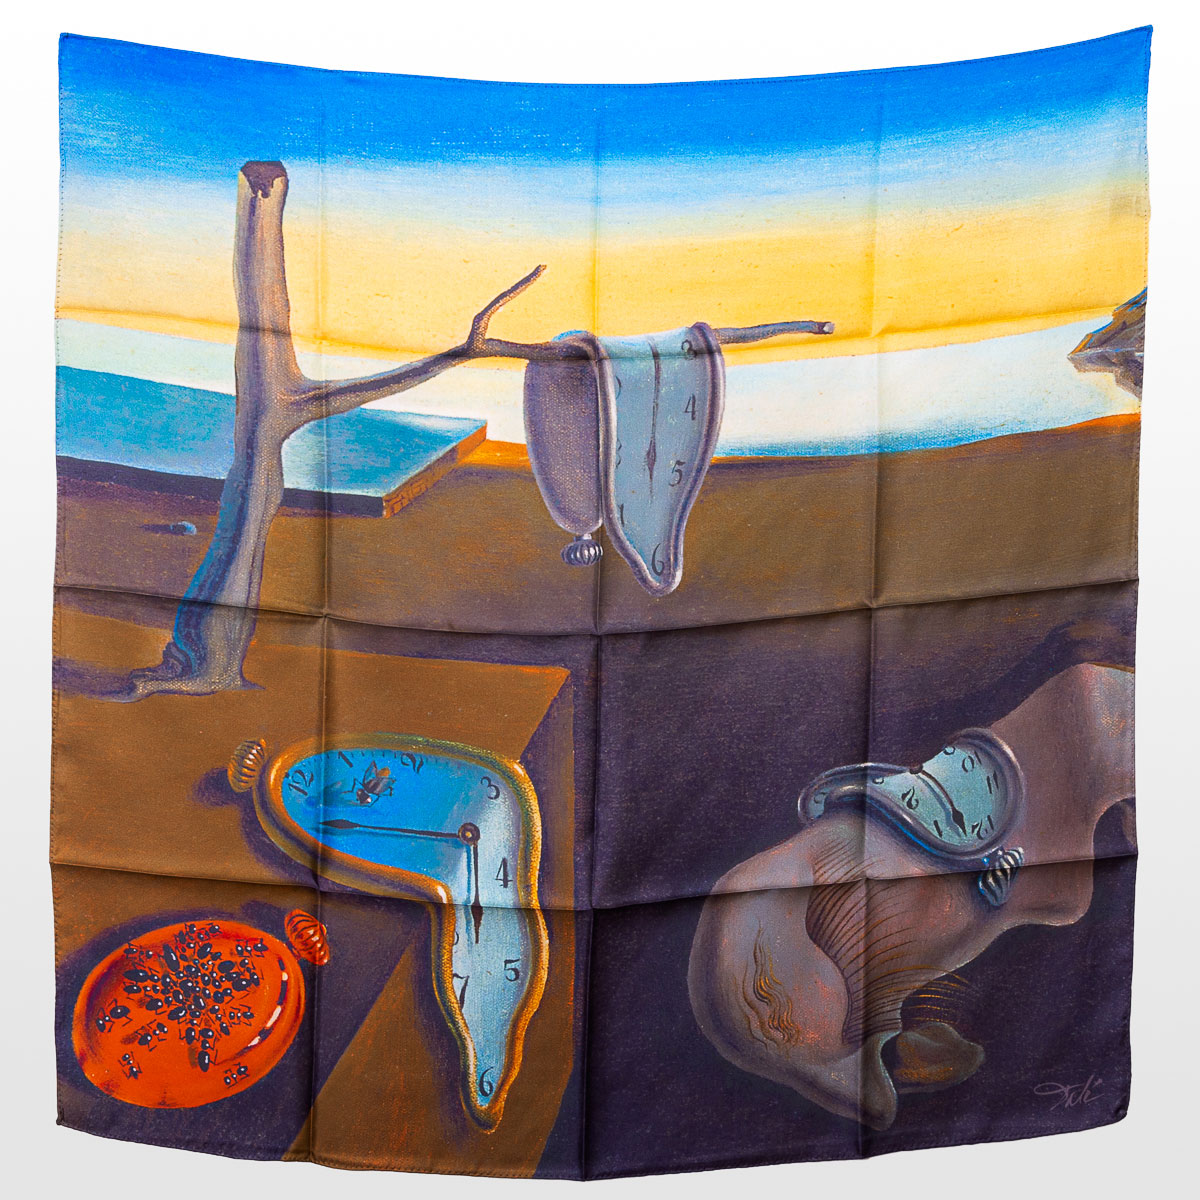 Dali Scarf - Persistence of Memory (unfolded)